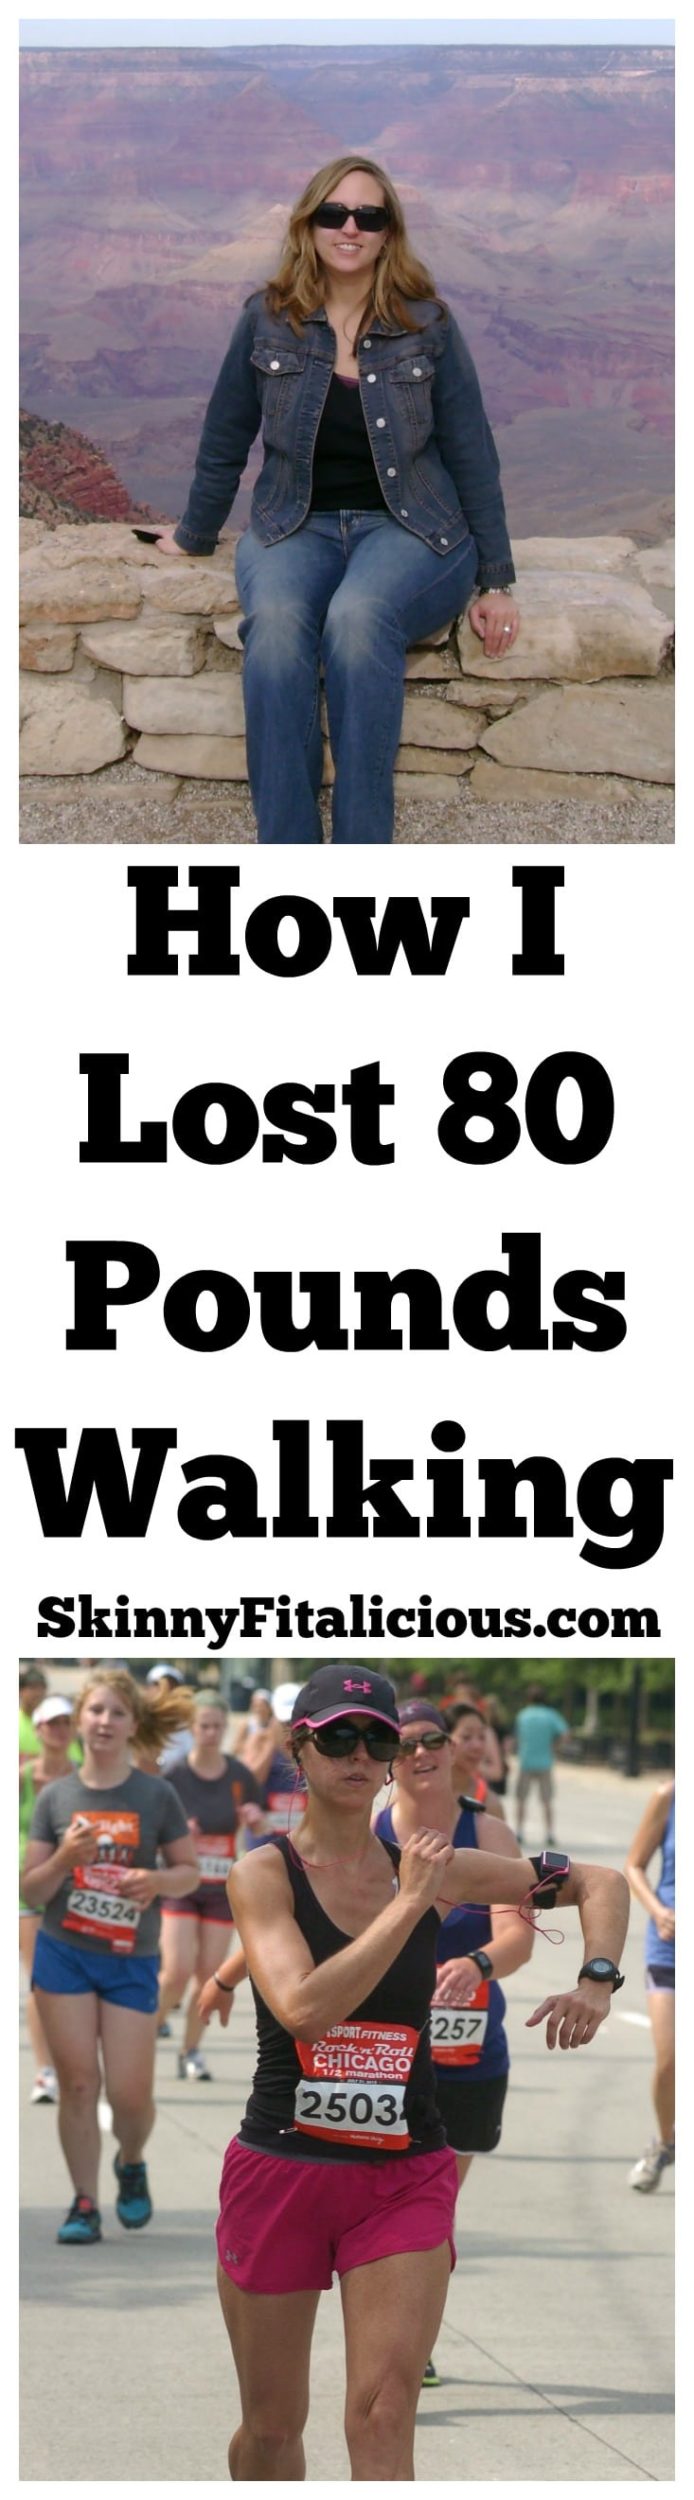 One day I started walking and that one day changed my life. Over the course of a year, I lost weight walking daily. Here's How I Lost 80 Pounds Walking.